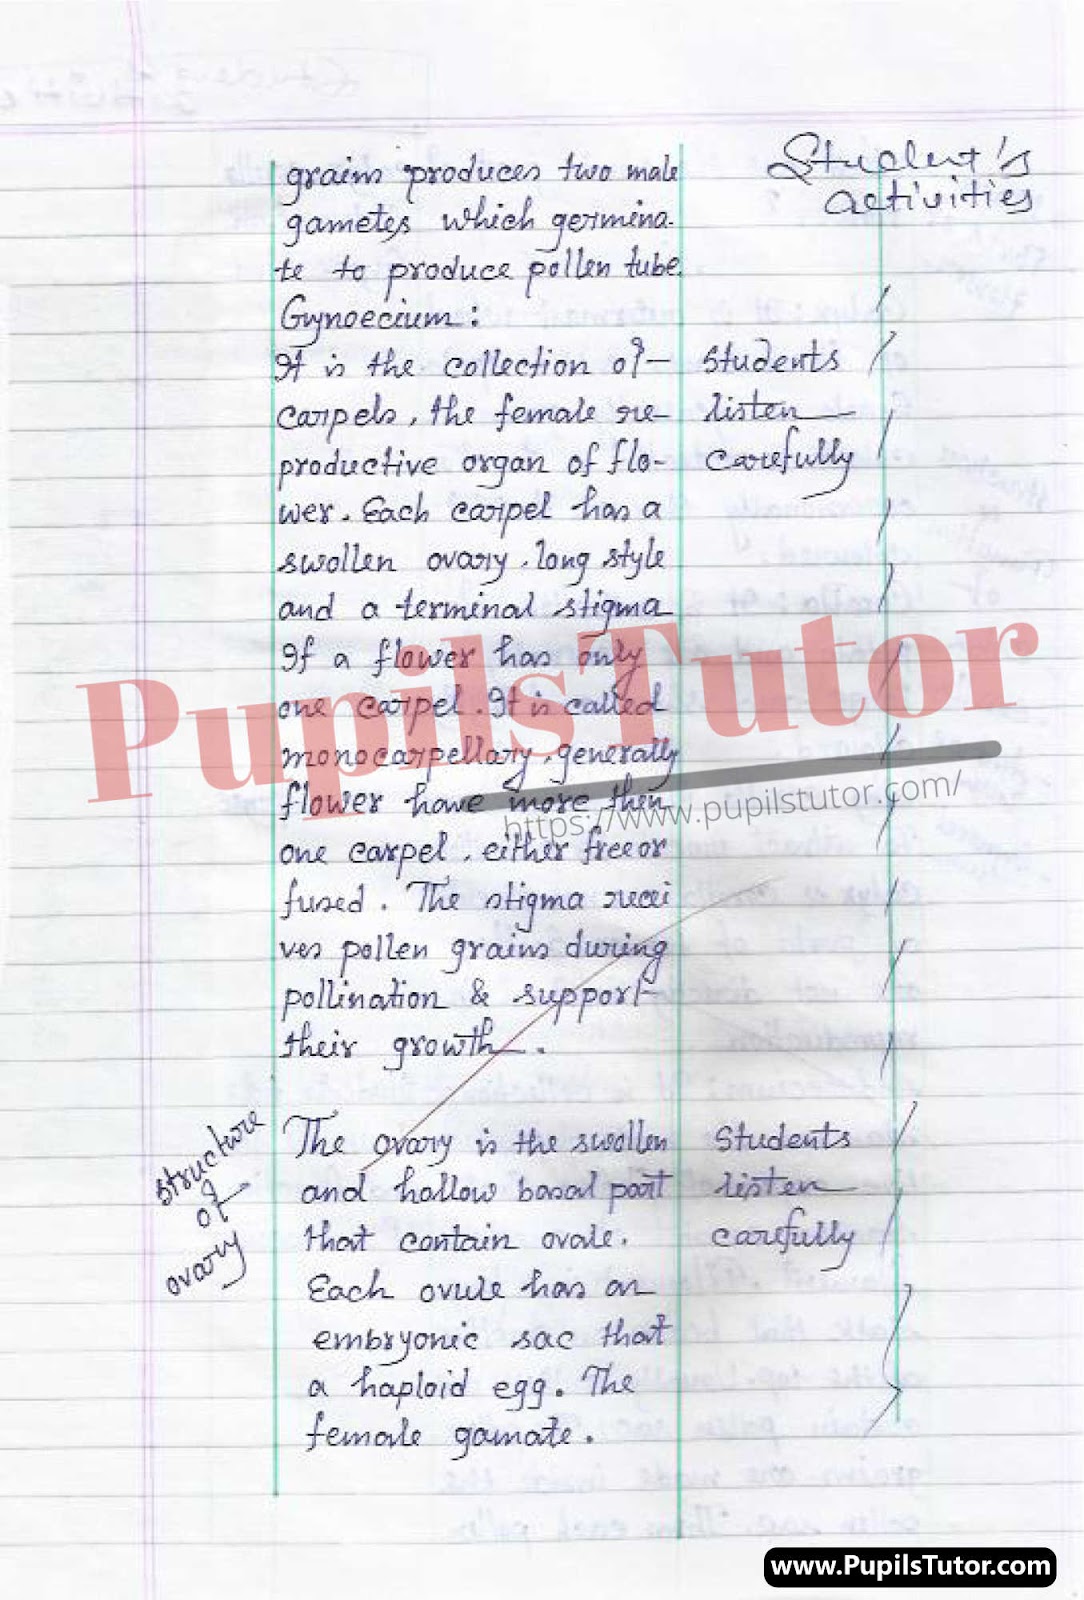 How To Make Biological Science Lesson Plan For Class 7 To 11 On Reproductive Parts Of Flowers And Pollination In English – [Page And Photo 4] – pupilstutor.com